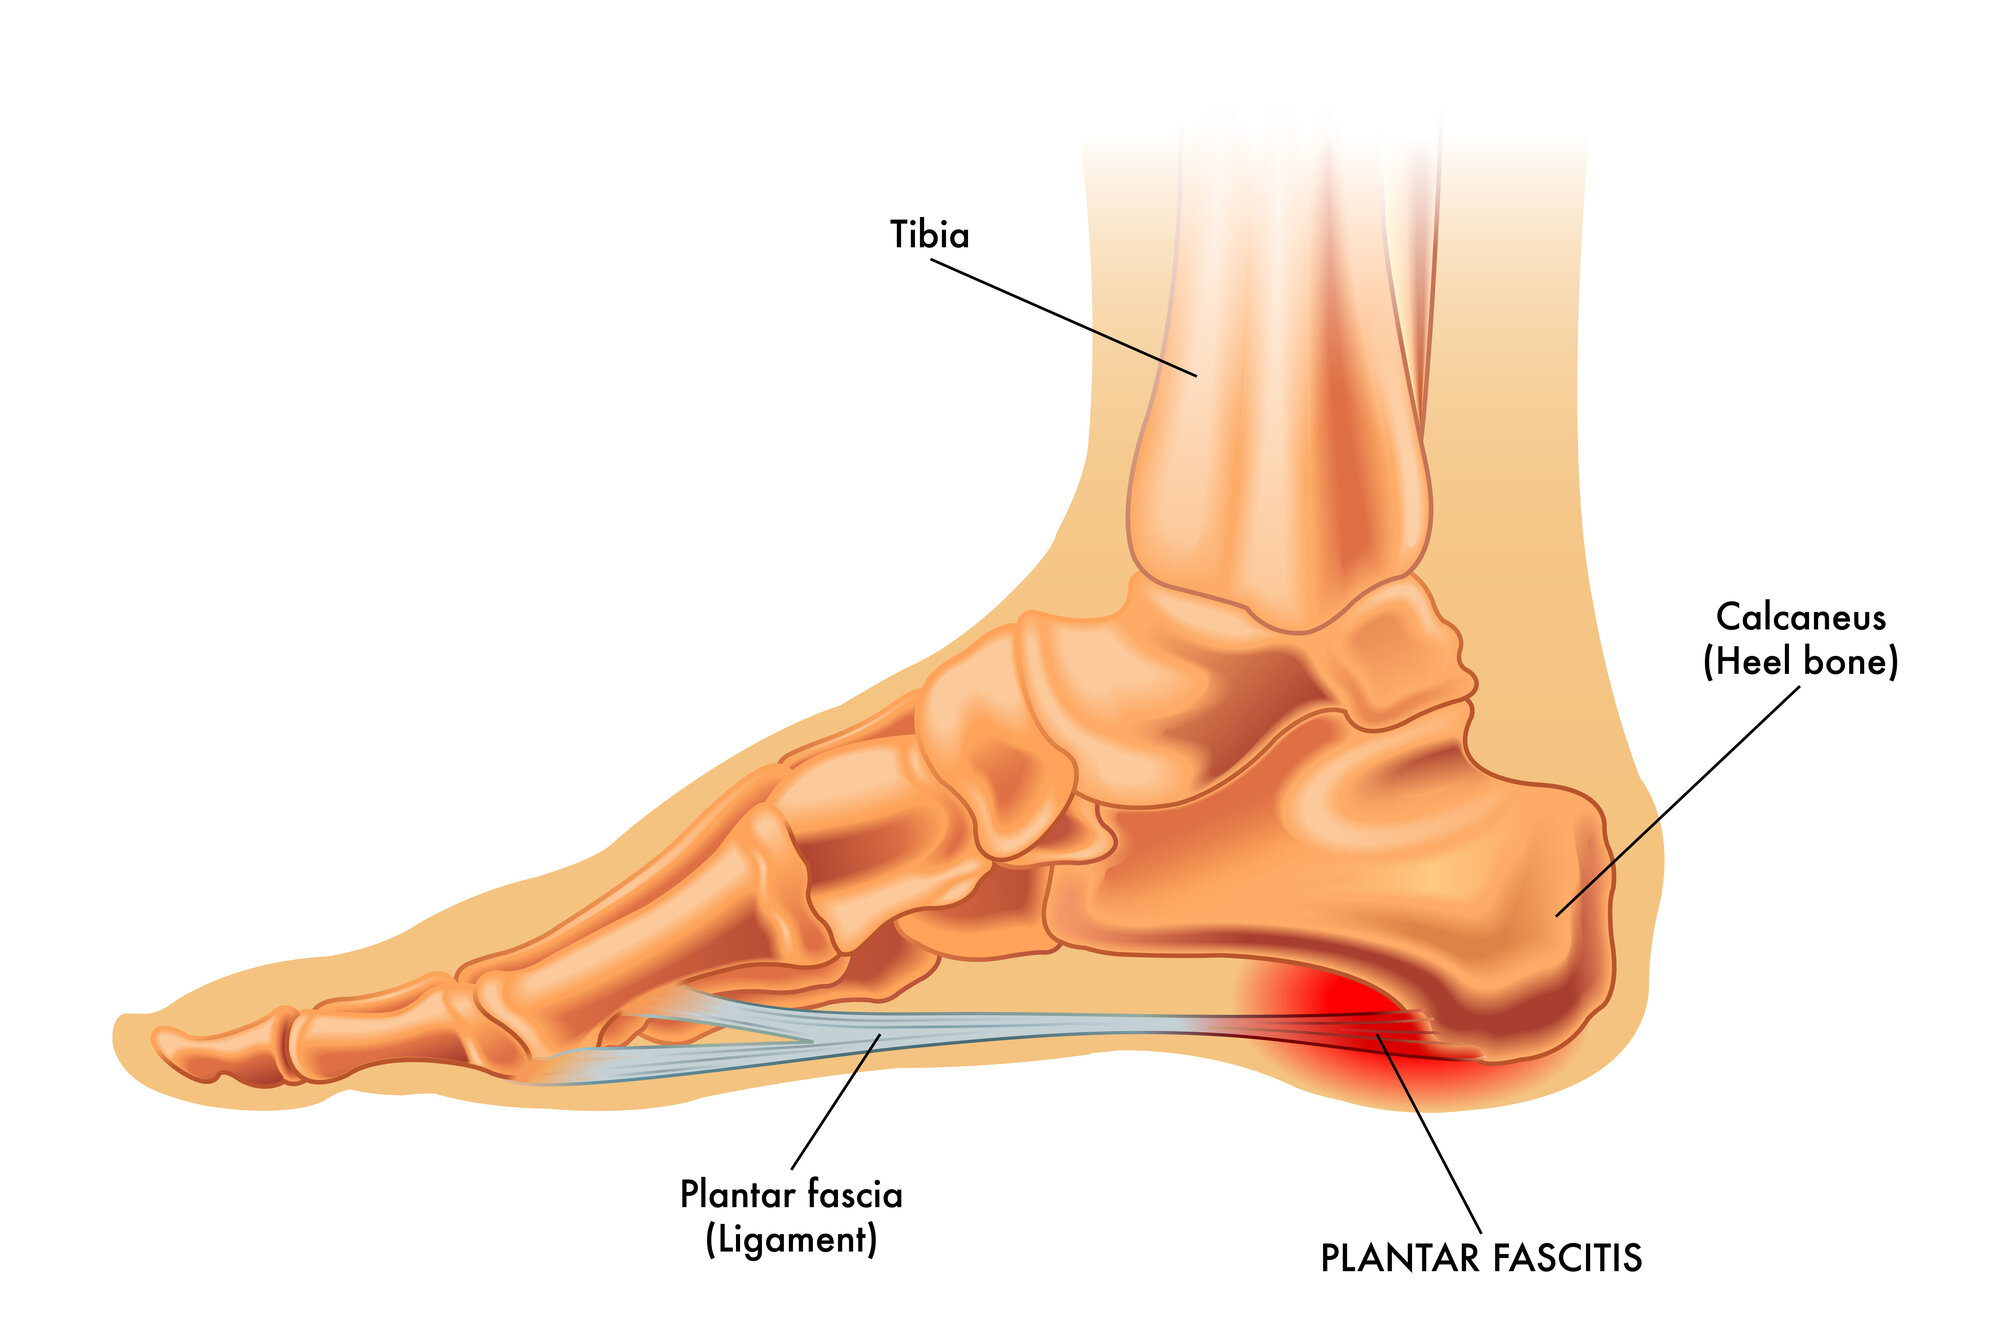 When is revision surgery required for ankle replacements?